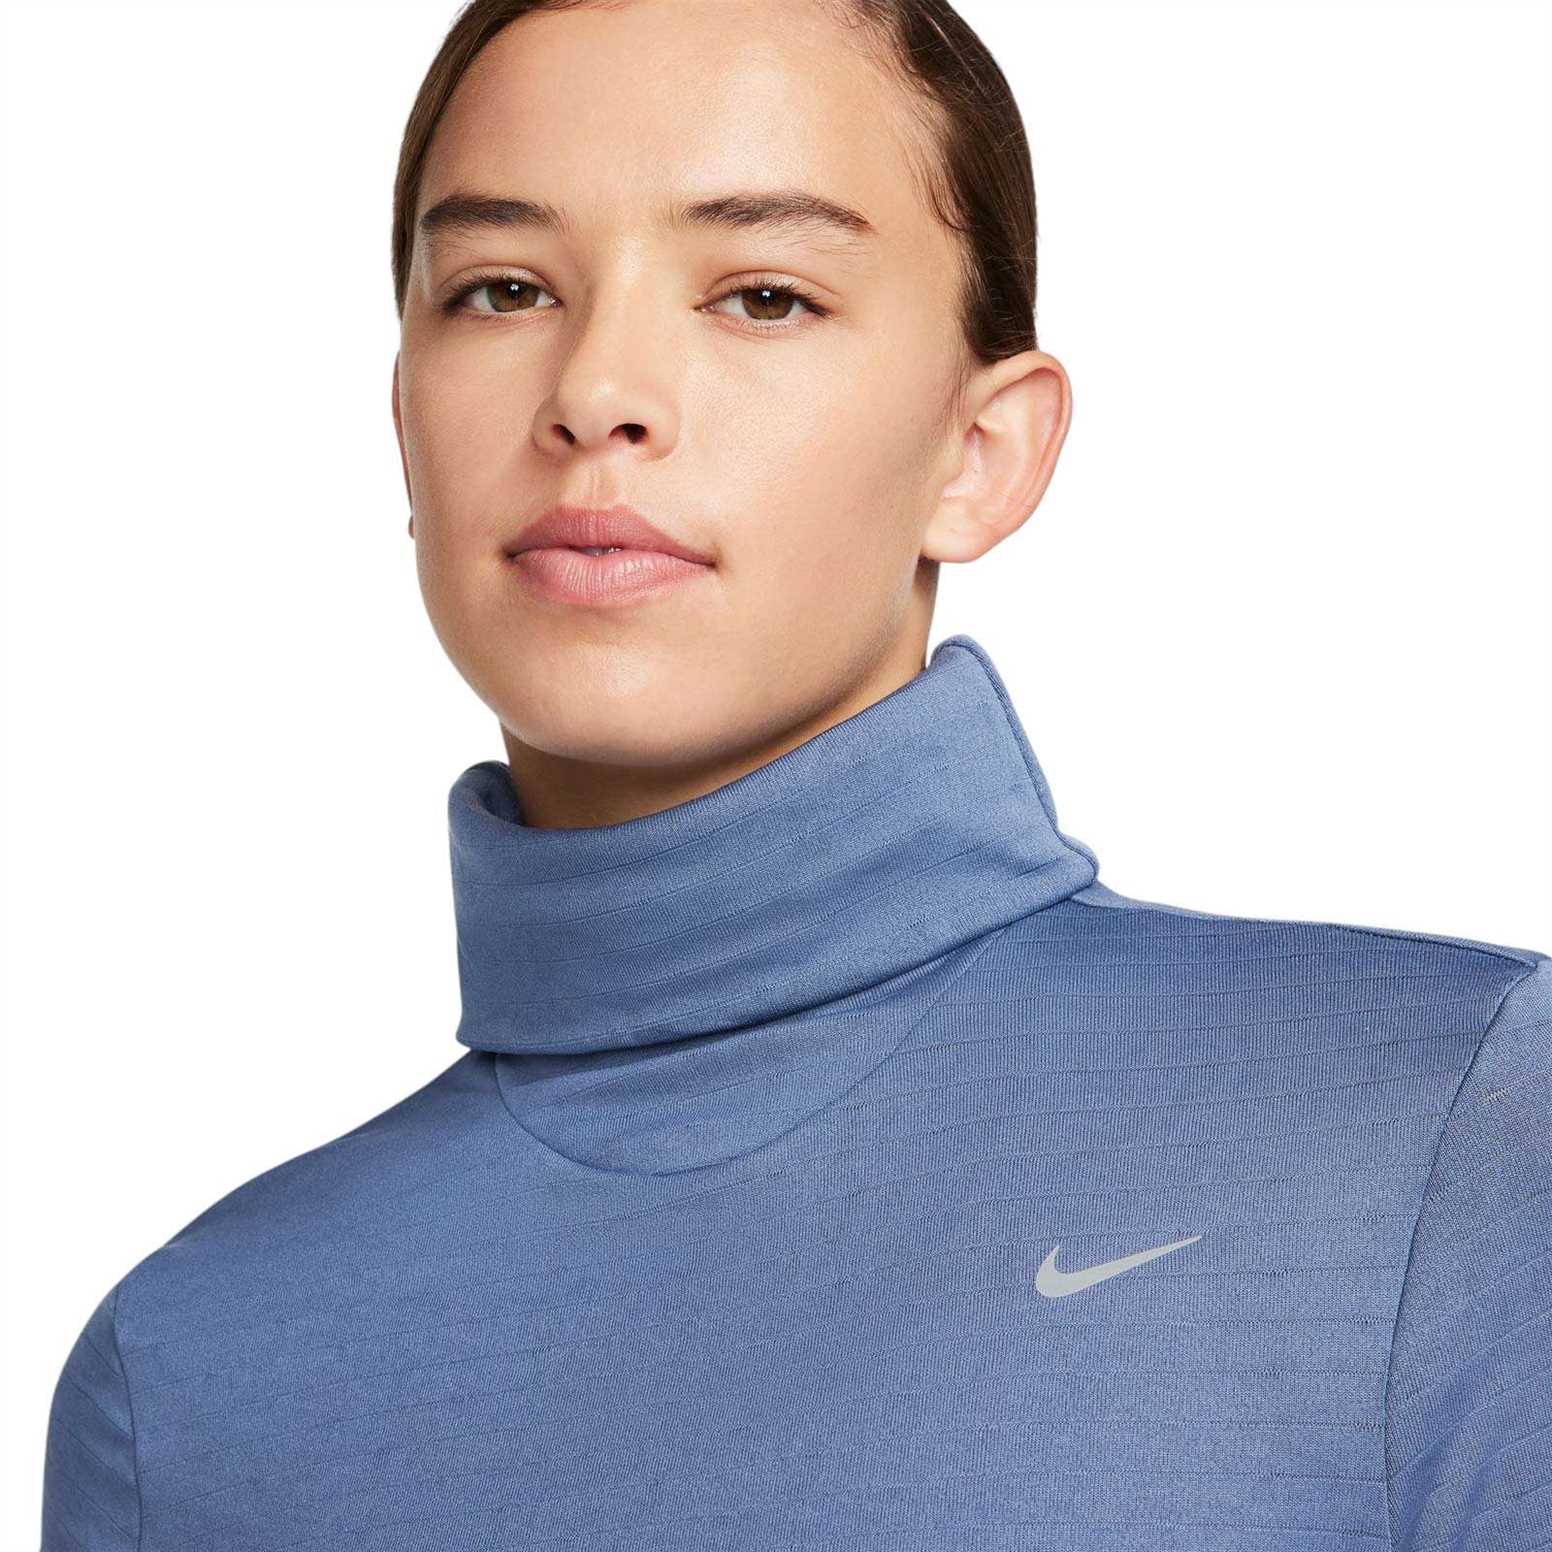 NIKE THERMA-FIT SWIFT WOMENS TURTLENECK RUNNING TOP